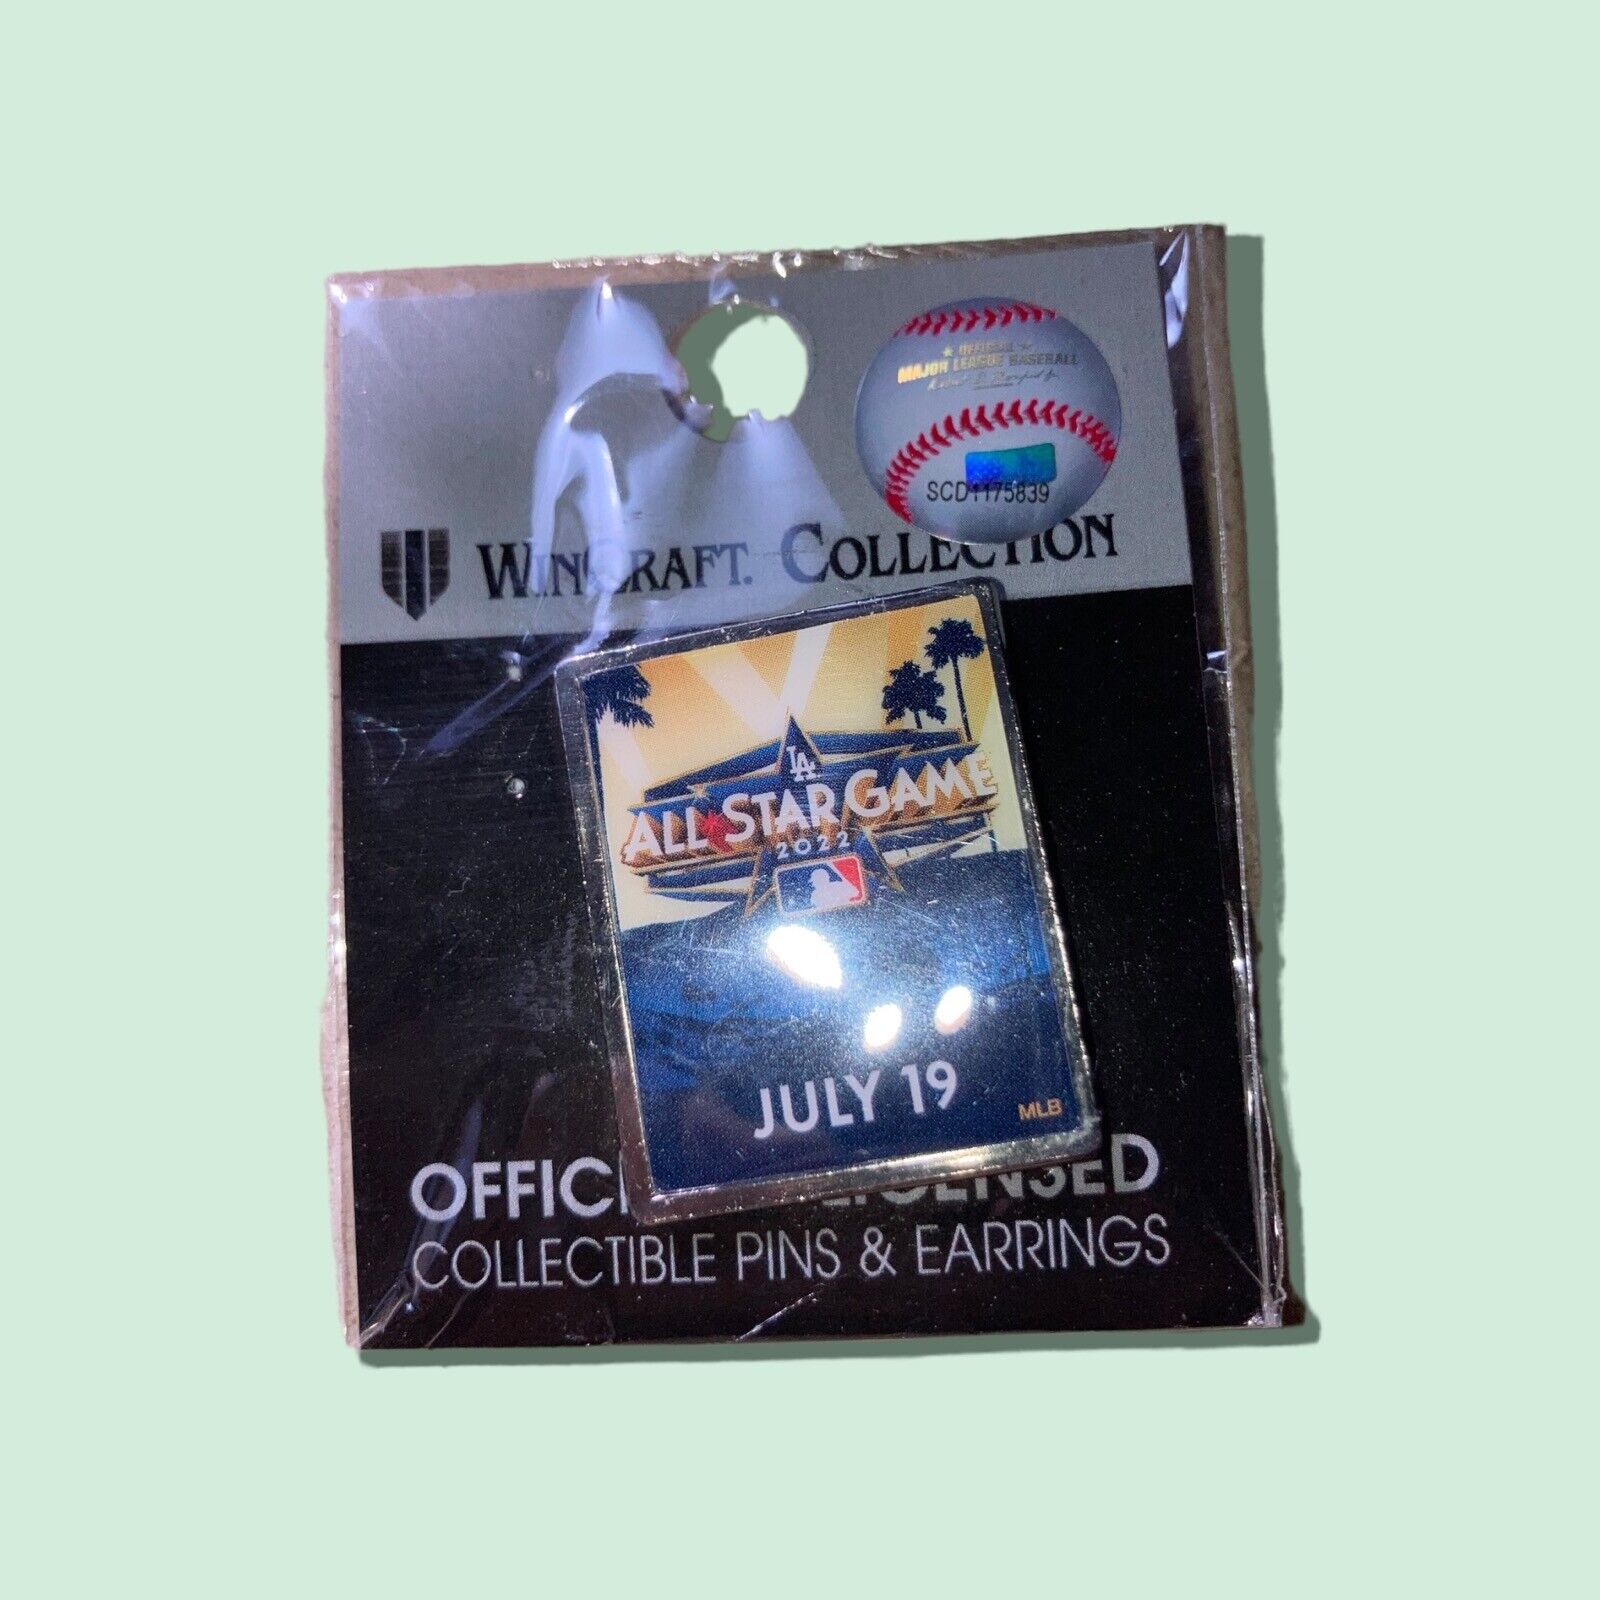 PIN 2022 MLB All Star Game Collectible July 19 Dodger Stadium L.A. Dodgers